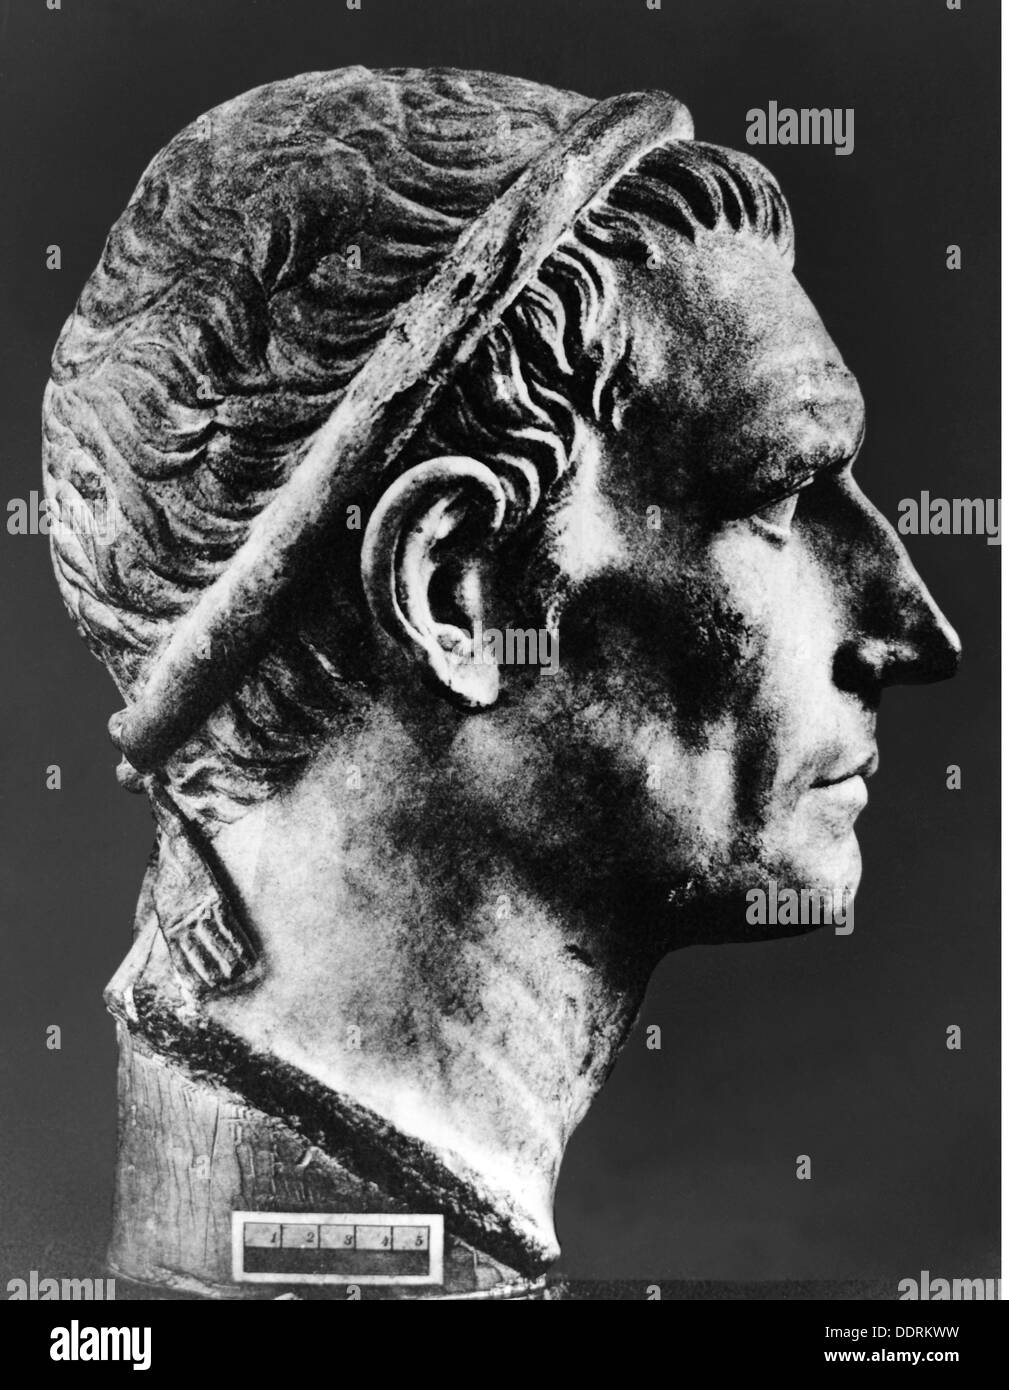 Antiochus III "the Great", 241 - 187 BC, King of the Seleucid Empire 223 - 187 BC, portrait, Roman bust, Louvre, Paris, Artist's Copyright has not to be cleared Stock Photo